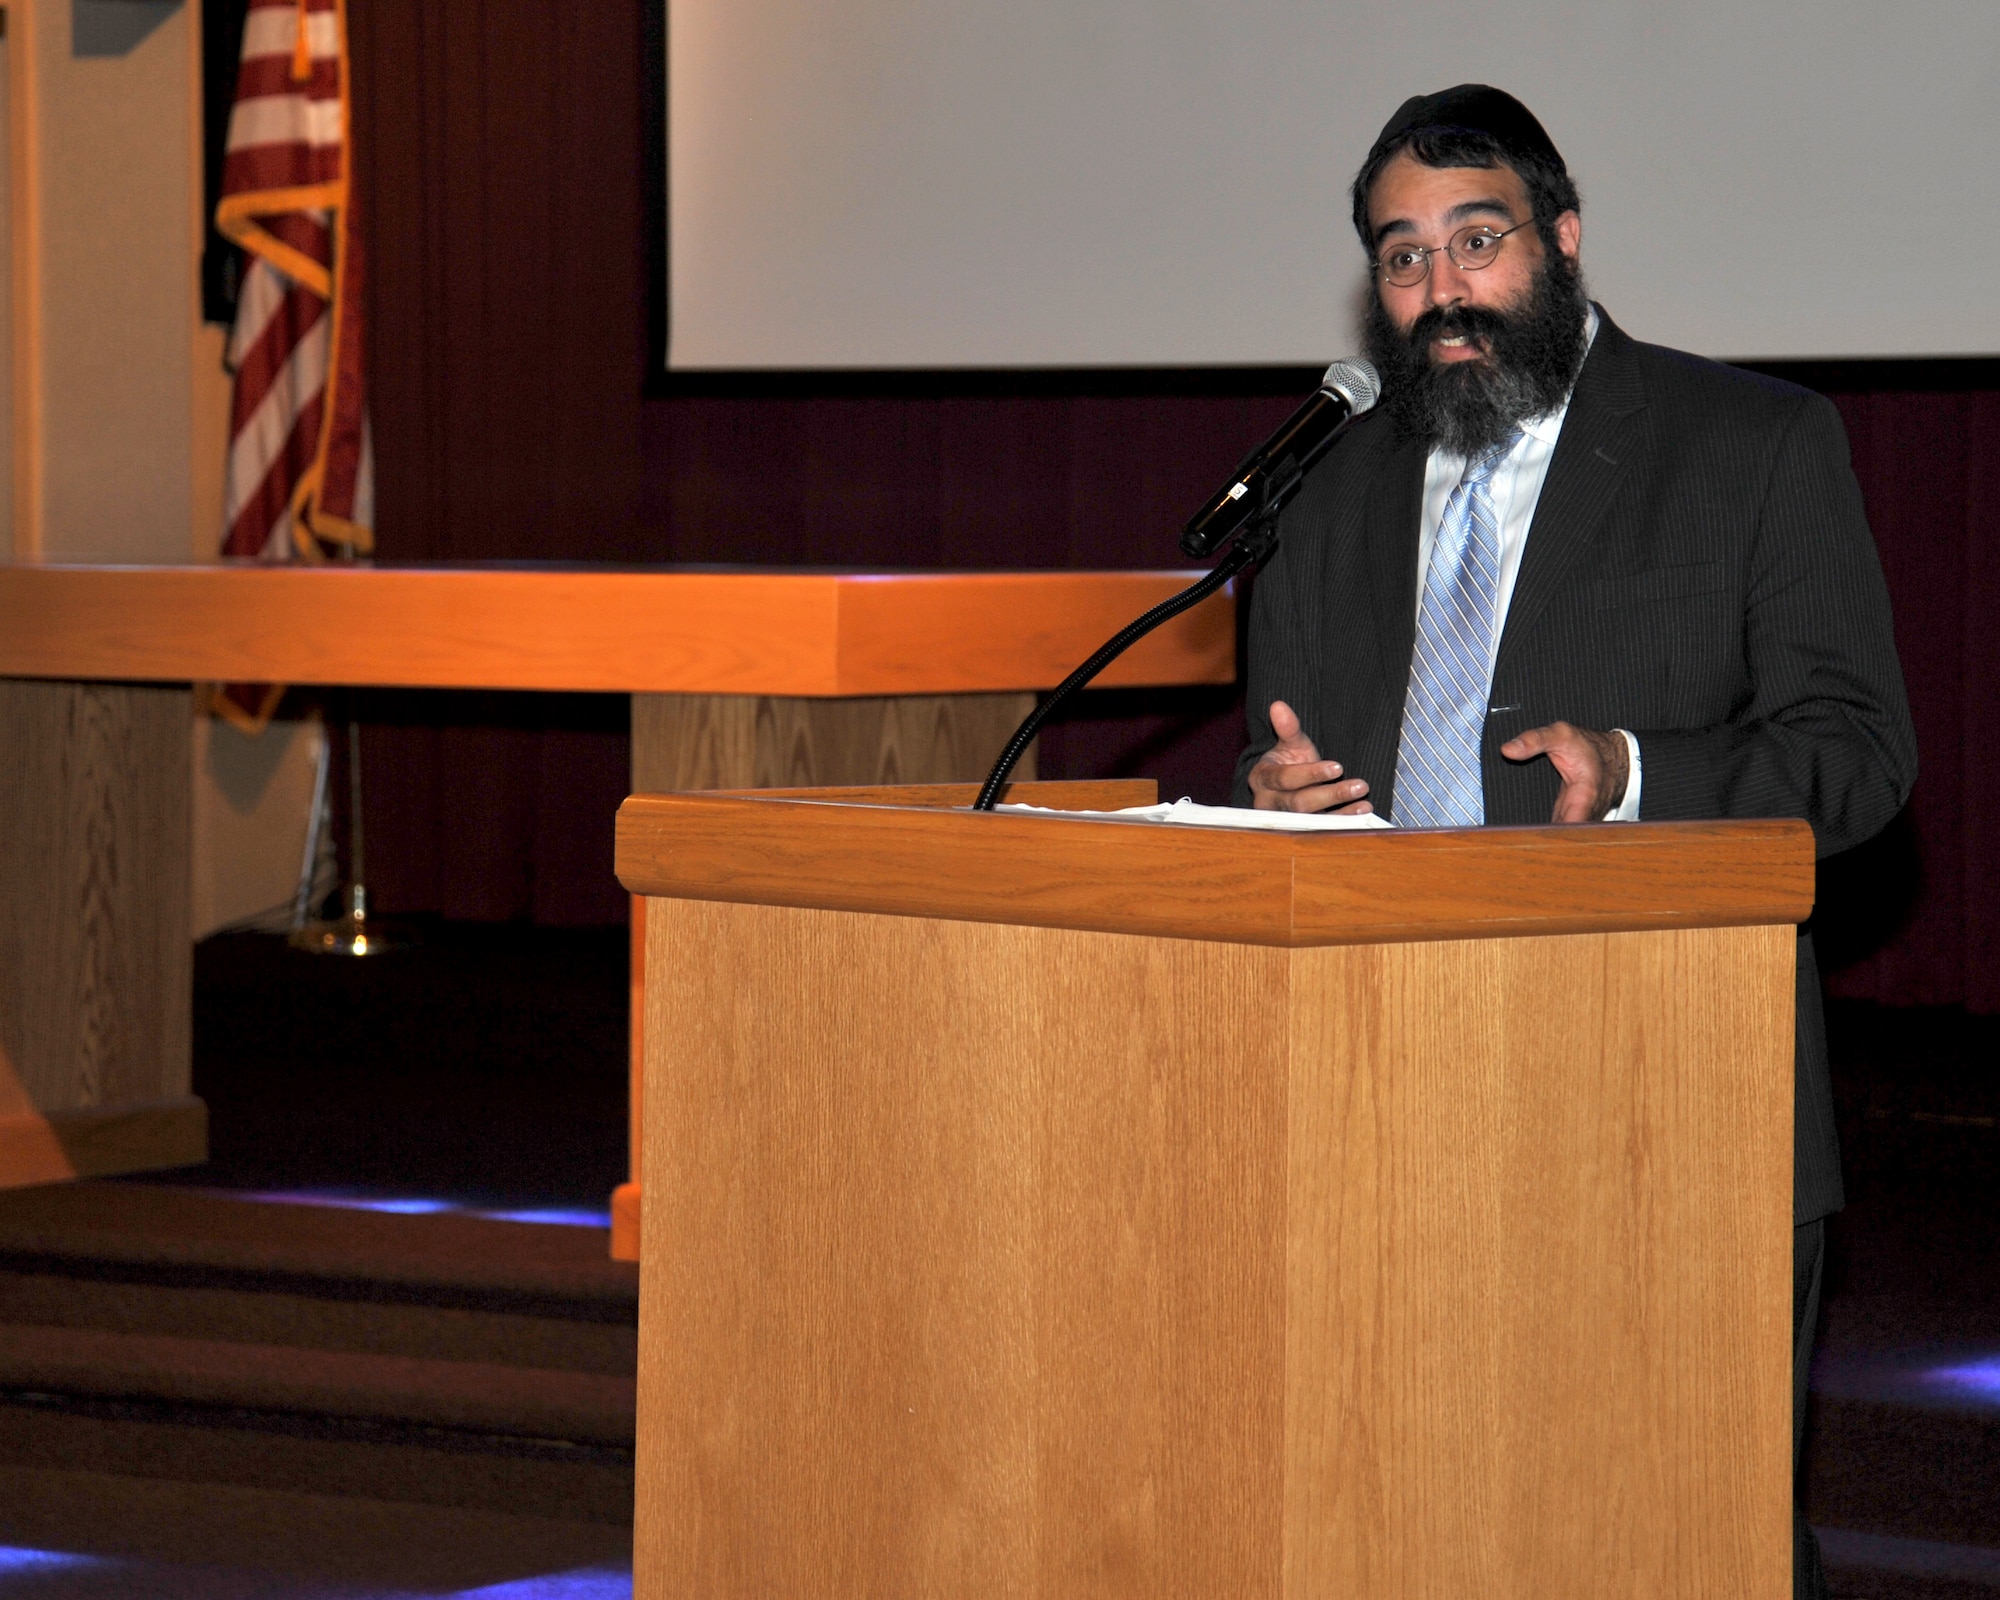 Rabbi Yisroel Hahn speaks with Airmen during a Holocaust Remembrance Day event May 4, 2016 at Fairchild Air Force Base, Wash. Hahn was invited to guest speak at the event to provide Airmen with insight and history of the Holocaust. Members of Team Fairchild gathered at the chapel to remember and honor those who suffered and died during the Holocaust. (U.S. Air Force photo/ Staff Sgt. Samantha Krolikowski)
